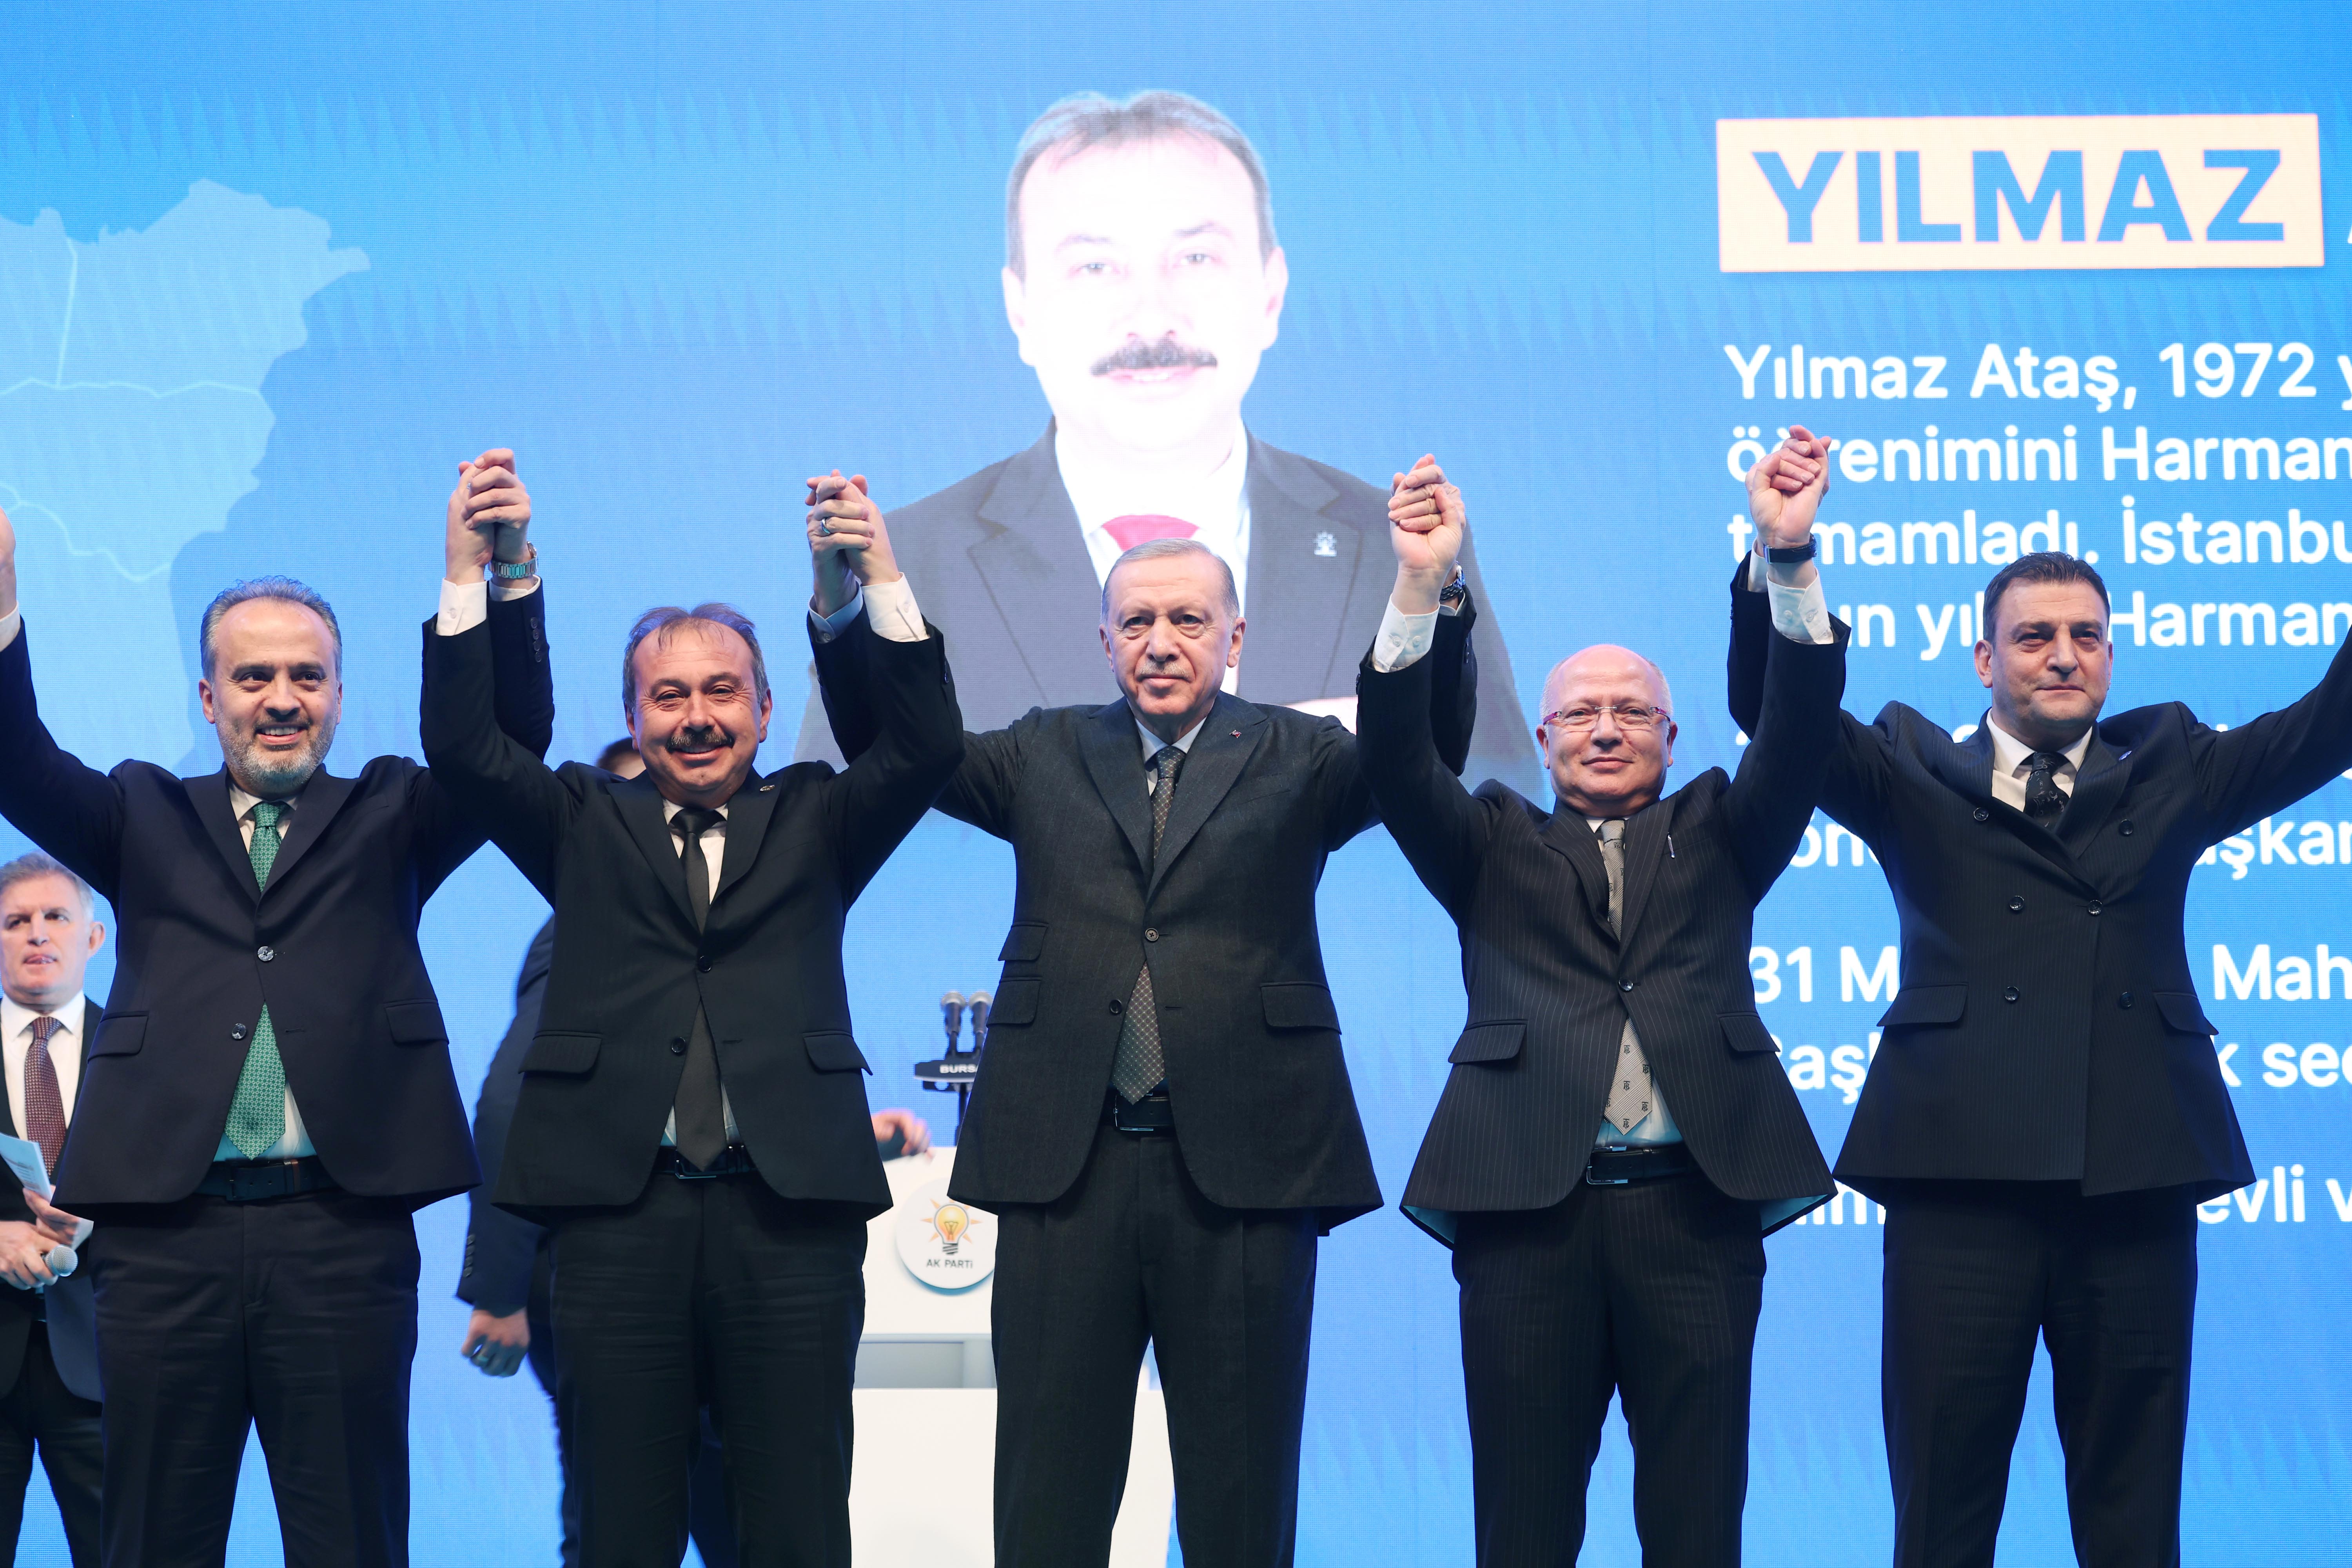 President Erdogan announced the visions of the party at the candidate presentation meeting